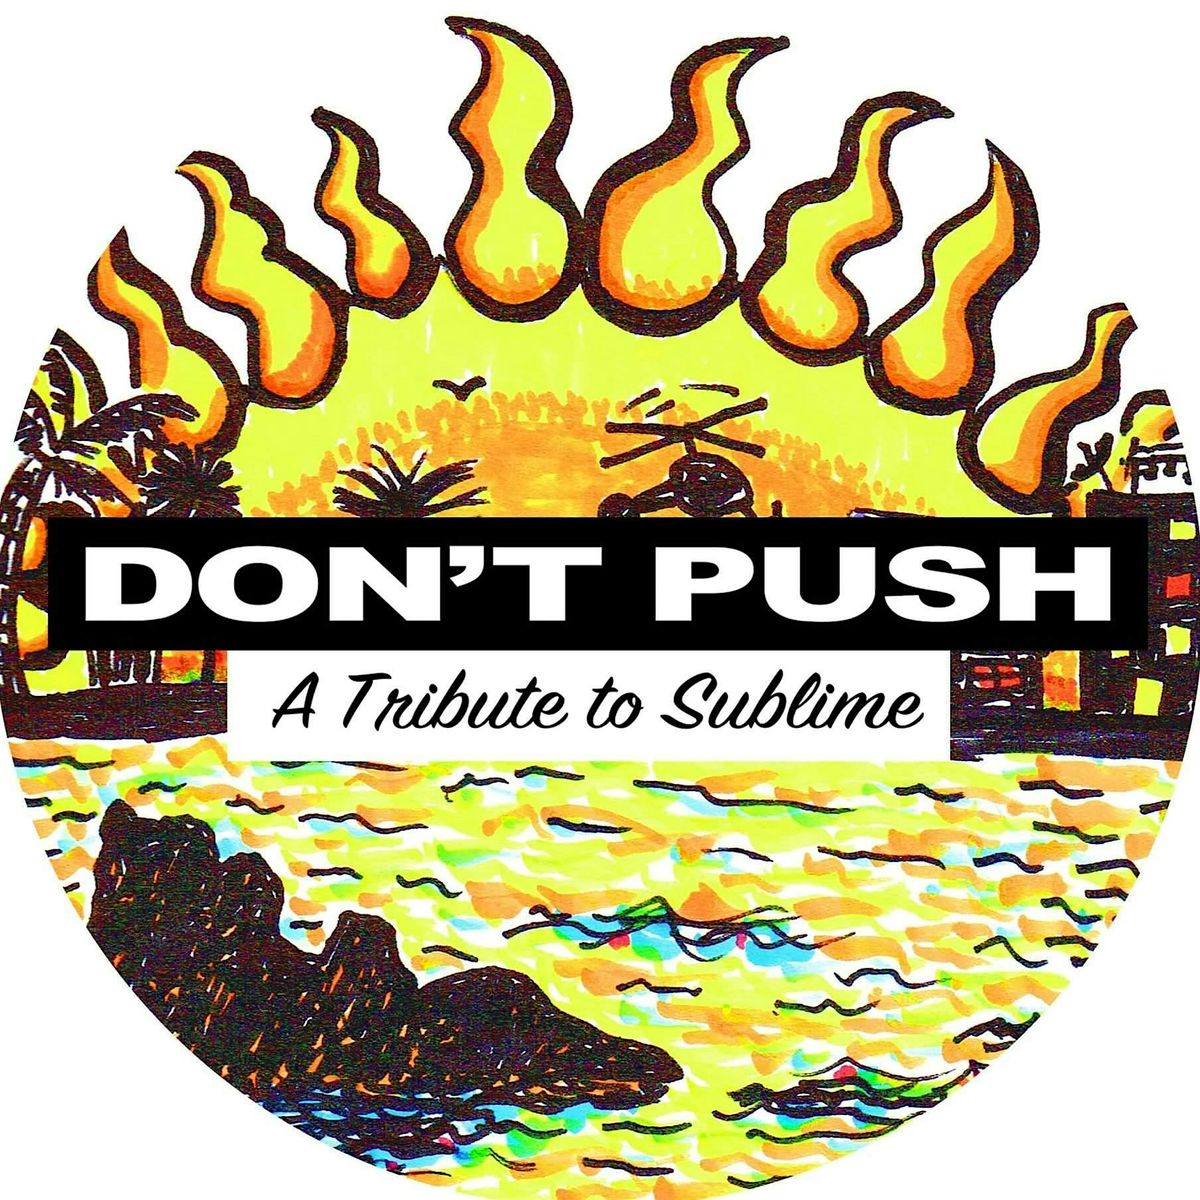 Sublime Tribute by Don't Push (FRIDAY SHOW)